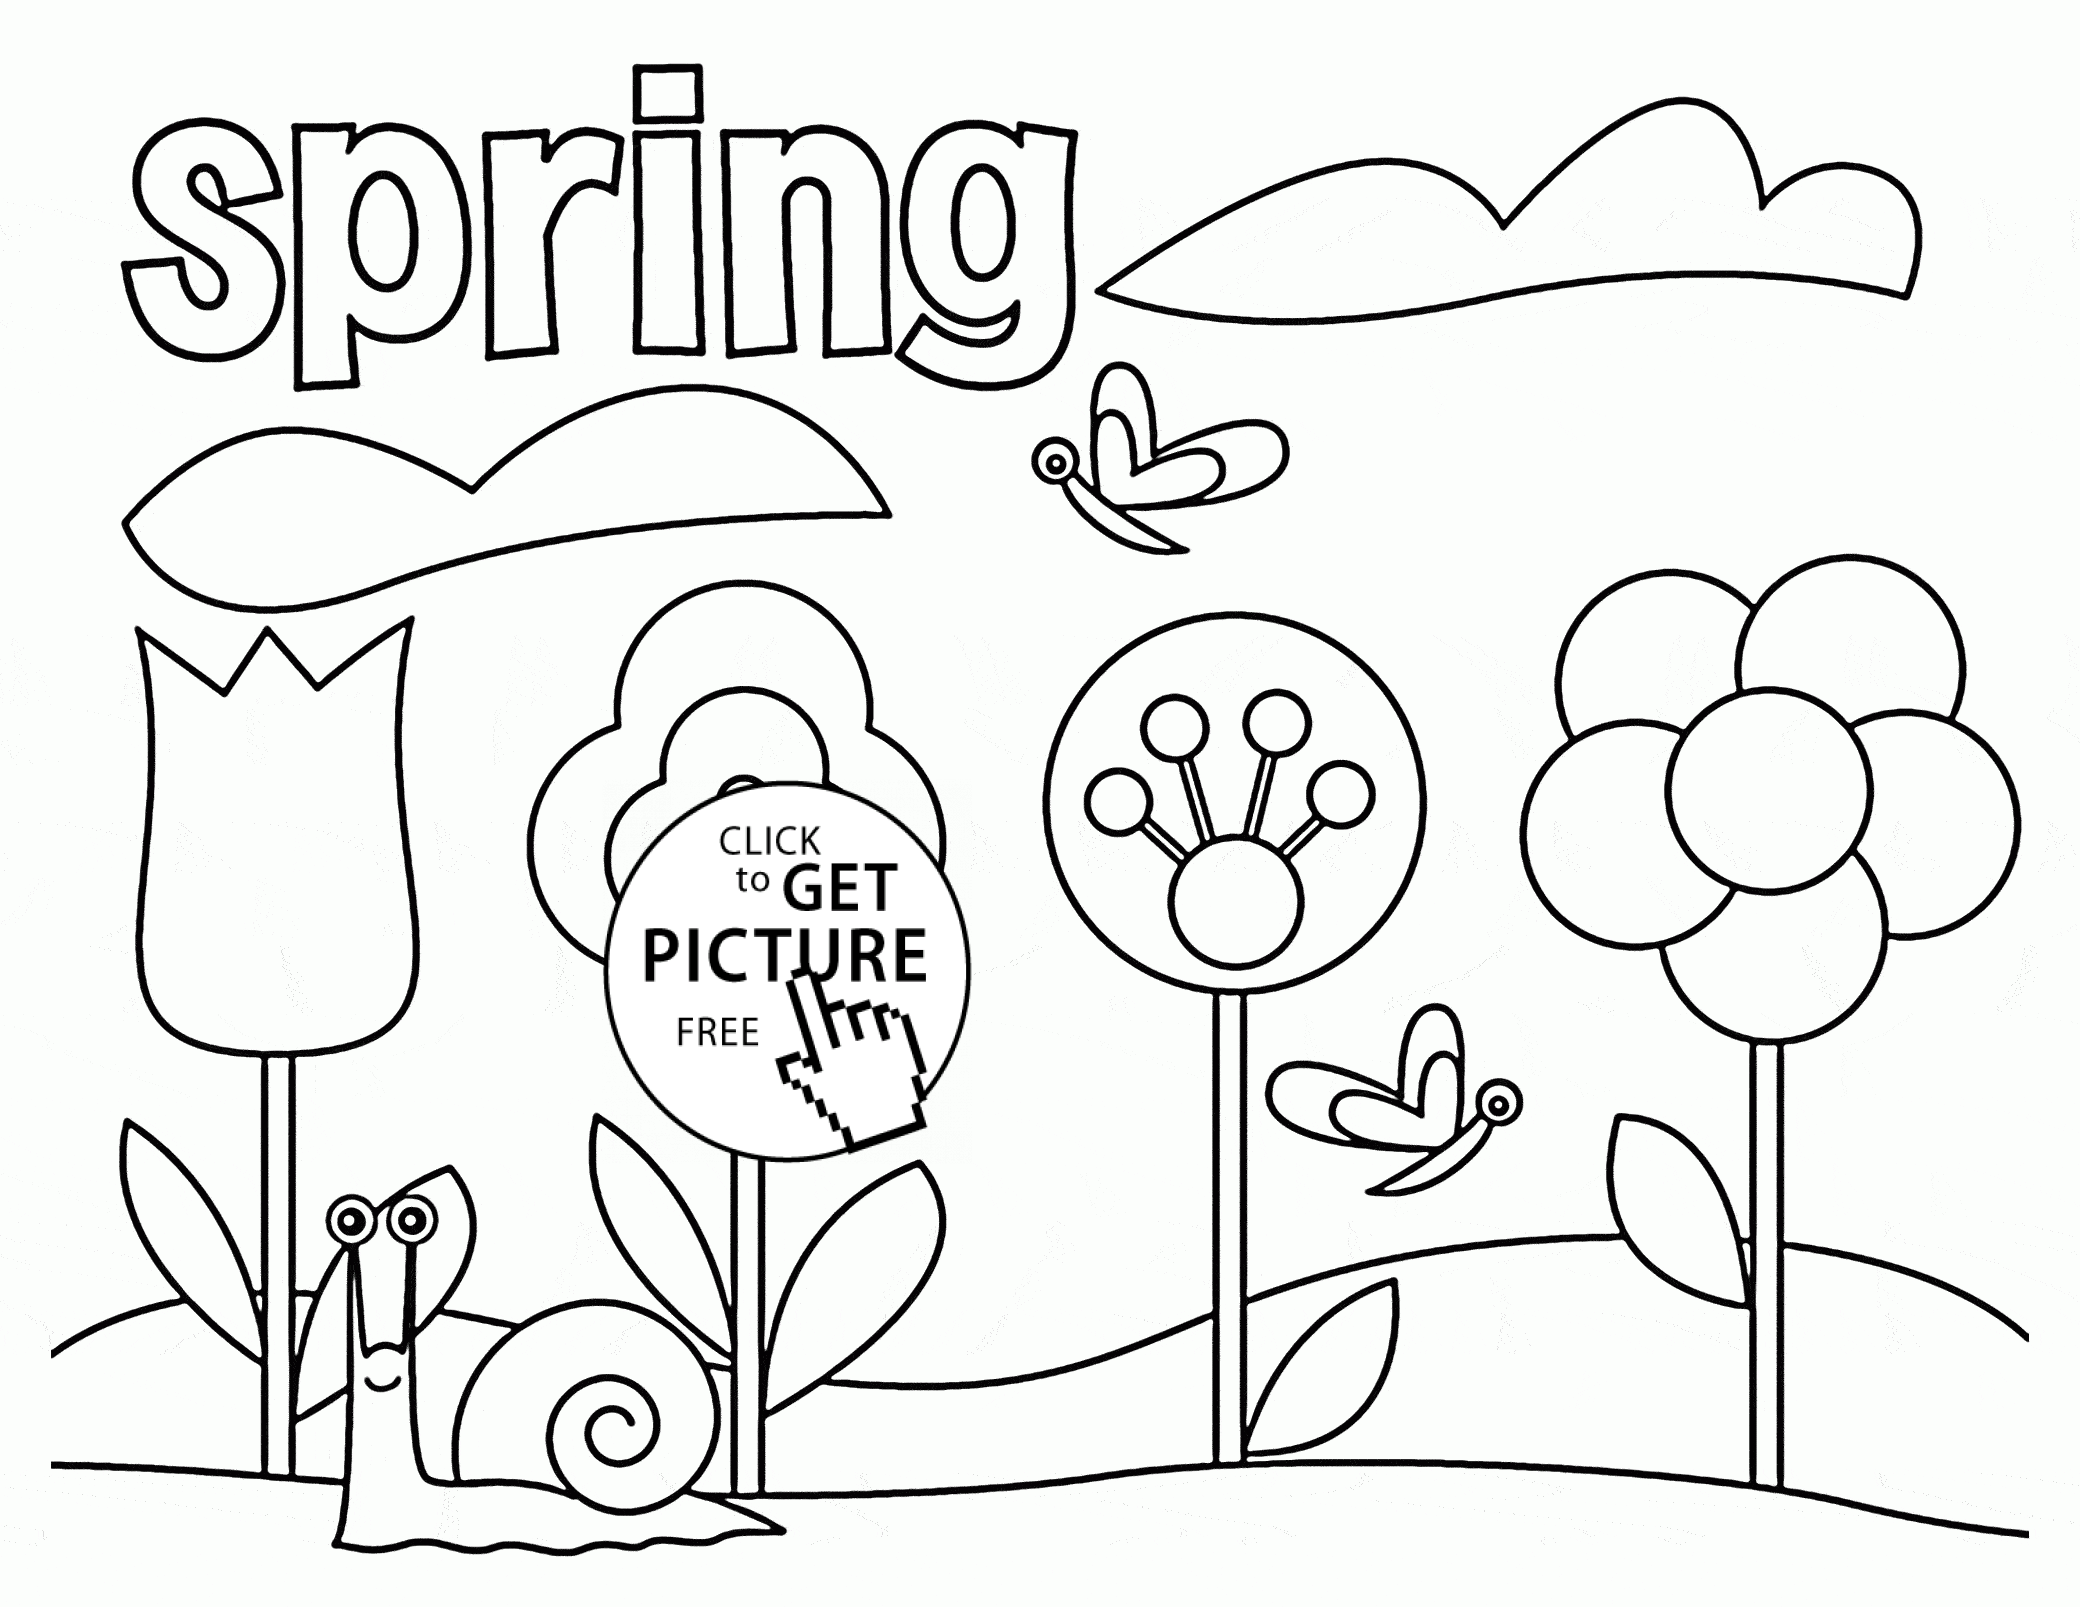 Spring coloring page for kids, seasons coloring pages